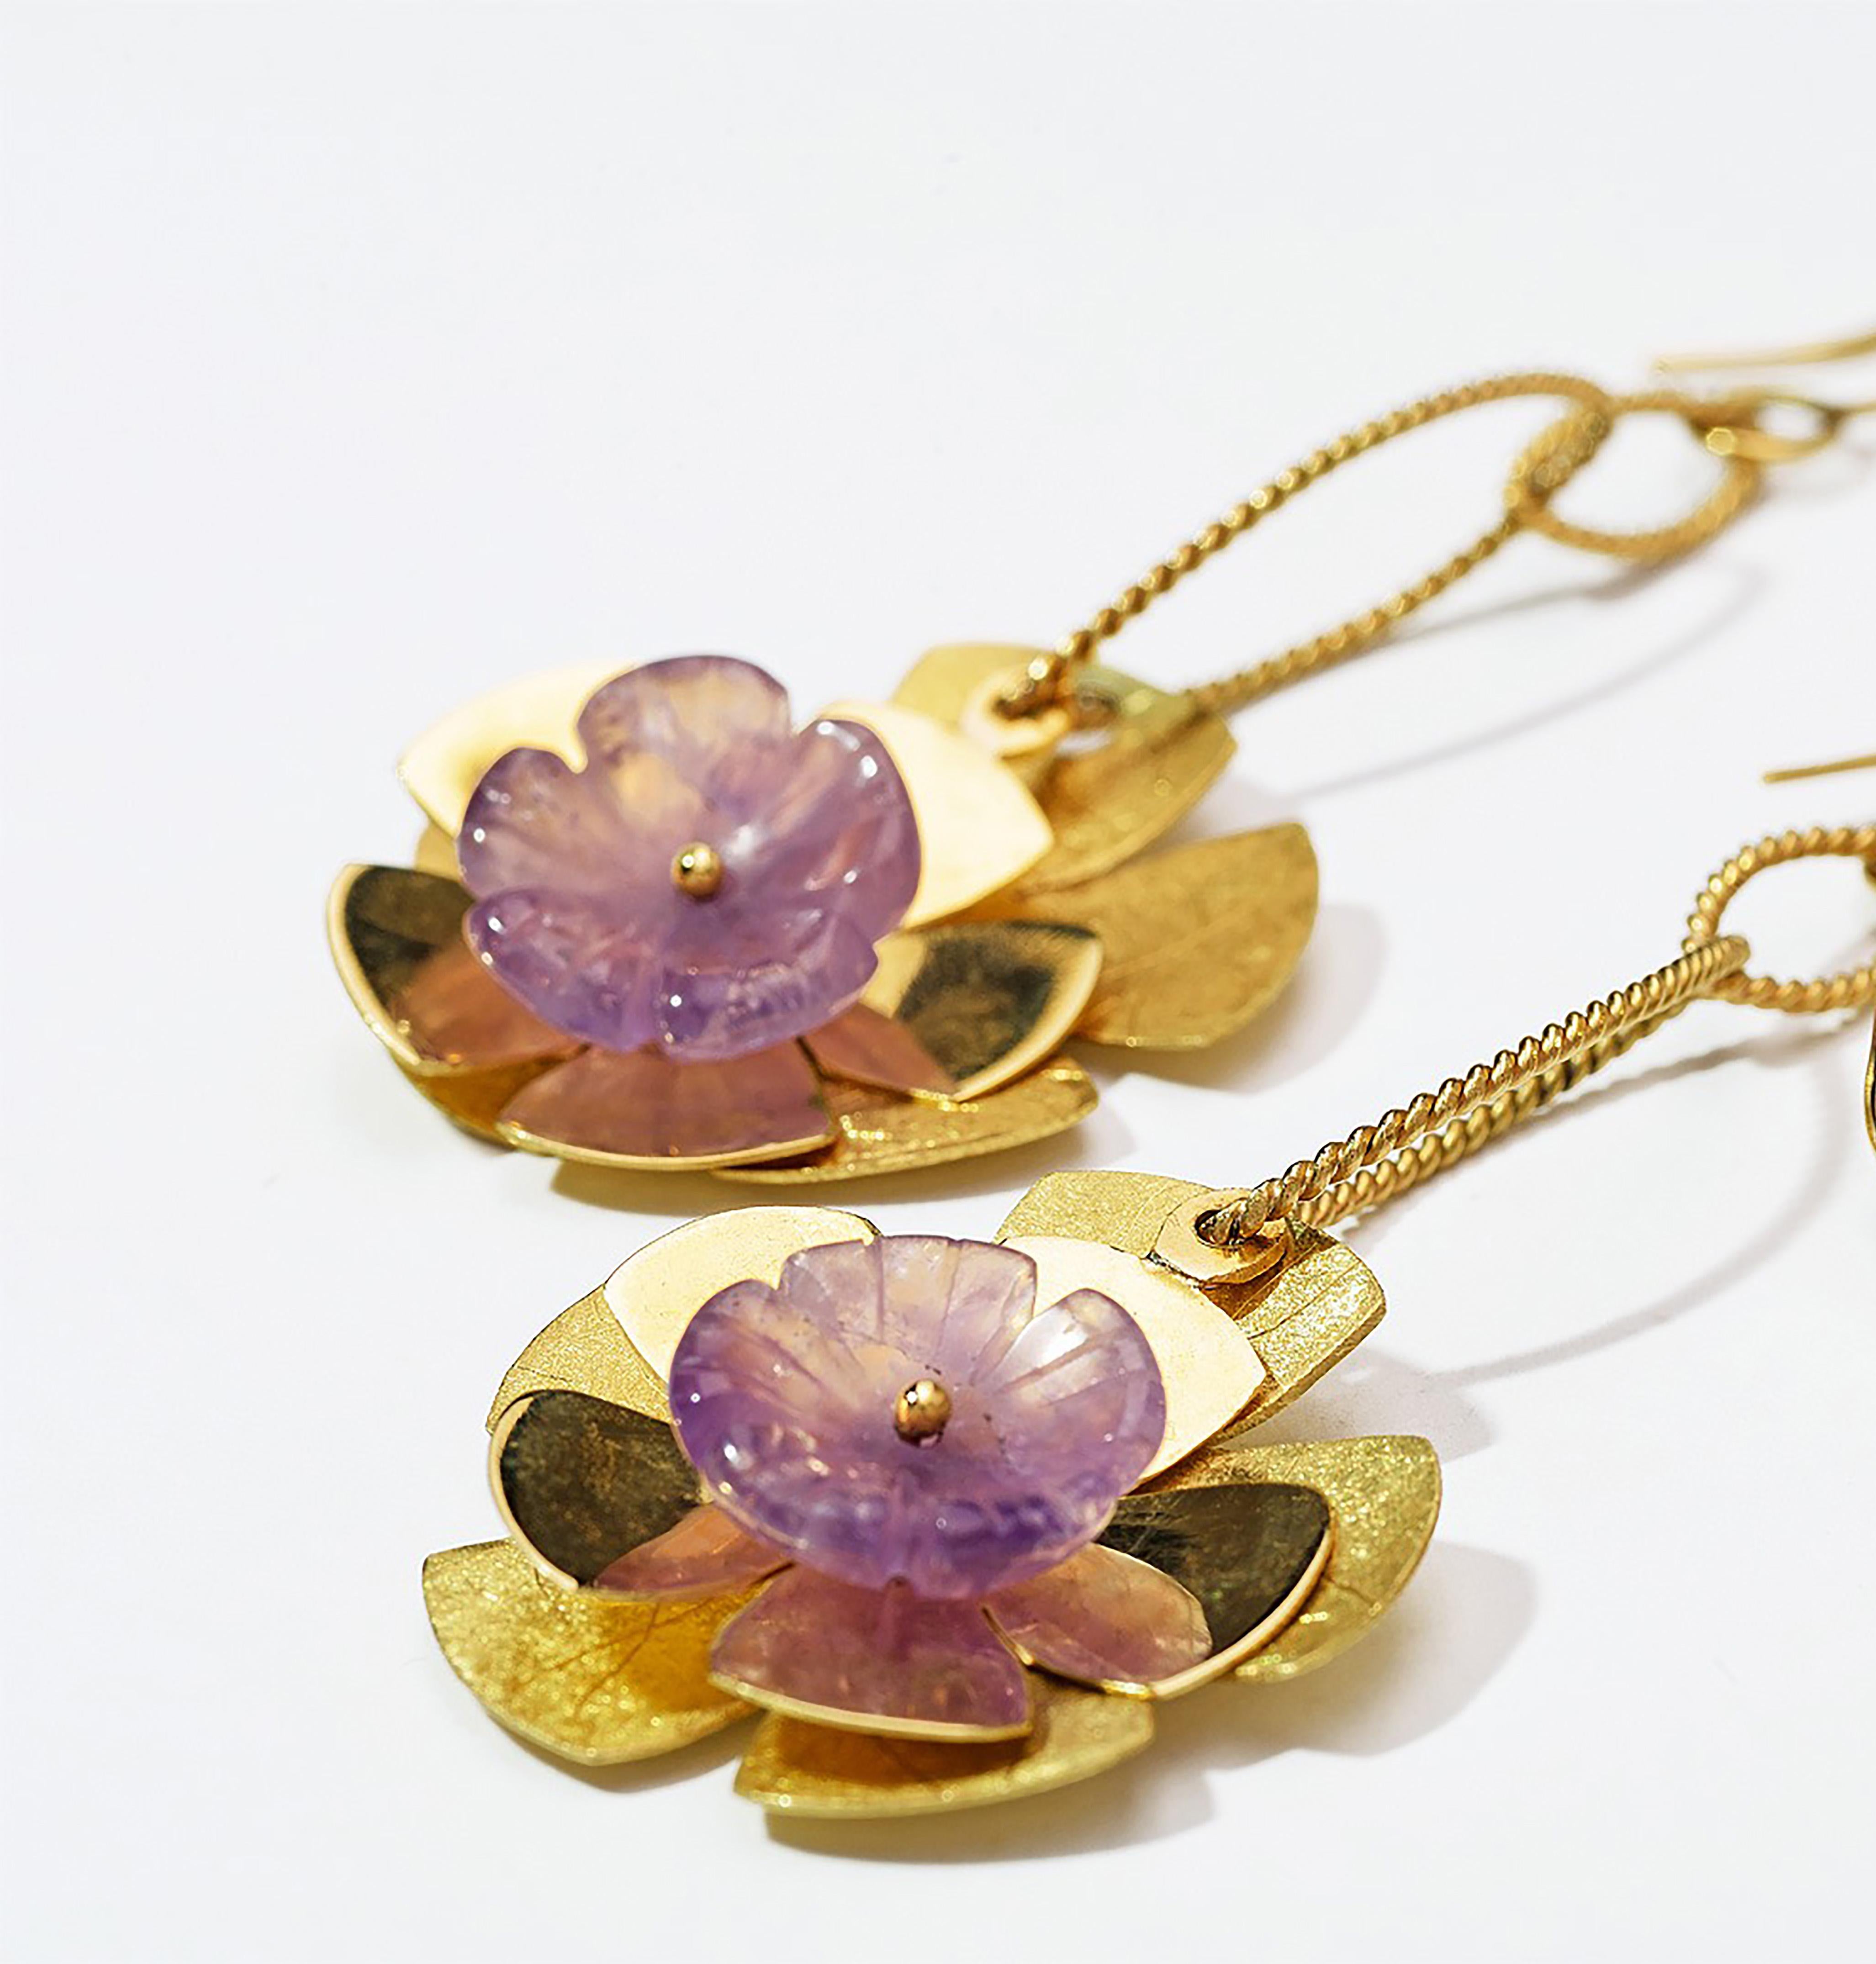 One-of-a-kind blooms for your ears. Movement and fluidity throughout, crafted in 18k yellow gold with a combination of polished, satin-finished flowers, and Amethyst cut flowers in the center. 

The Antu Earrings are part of the Constellation